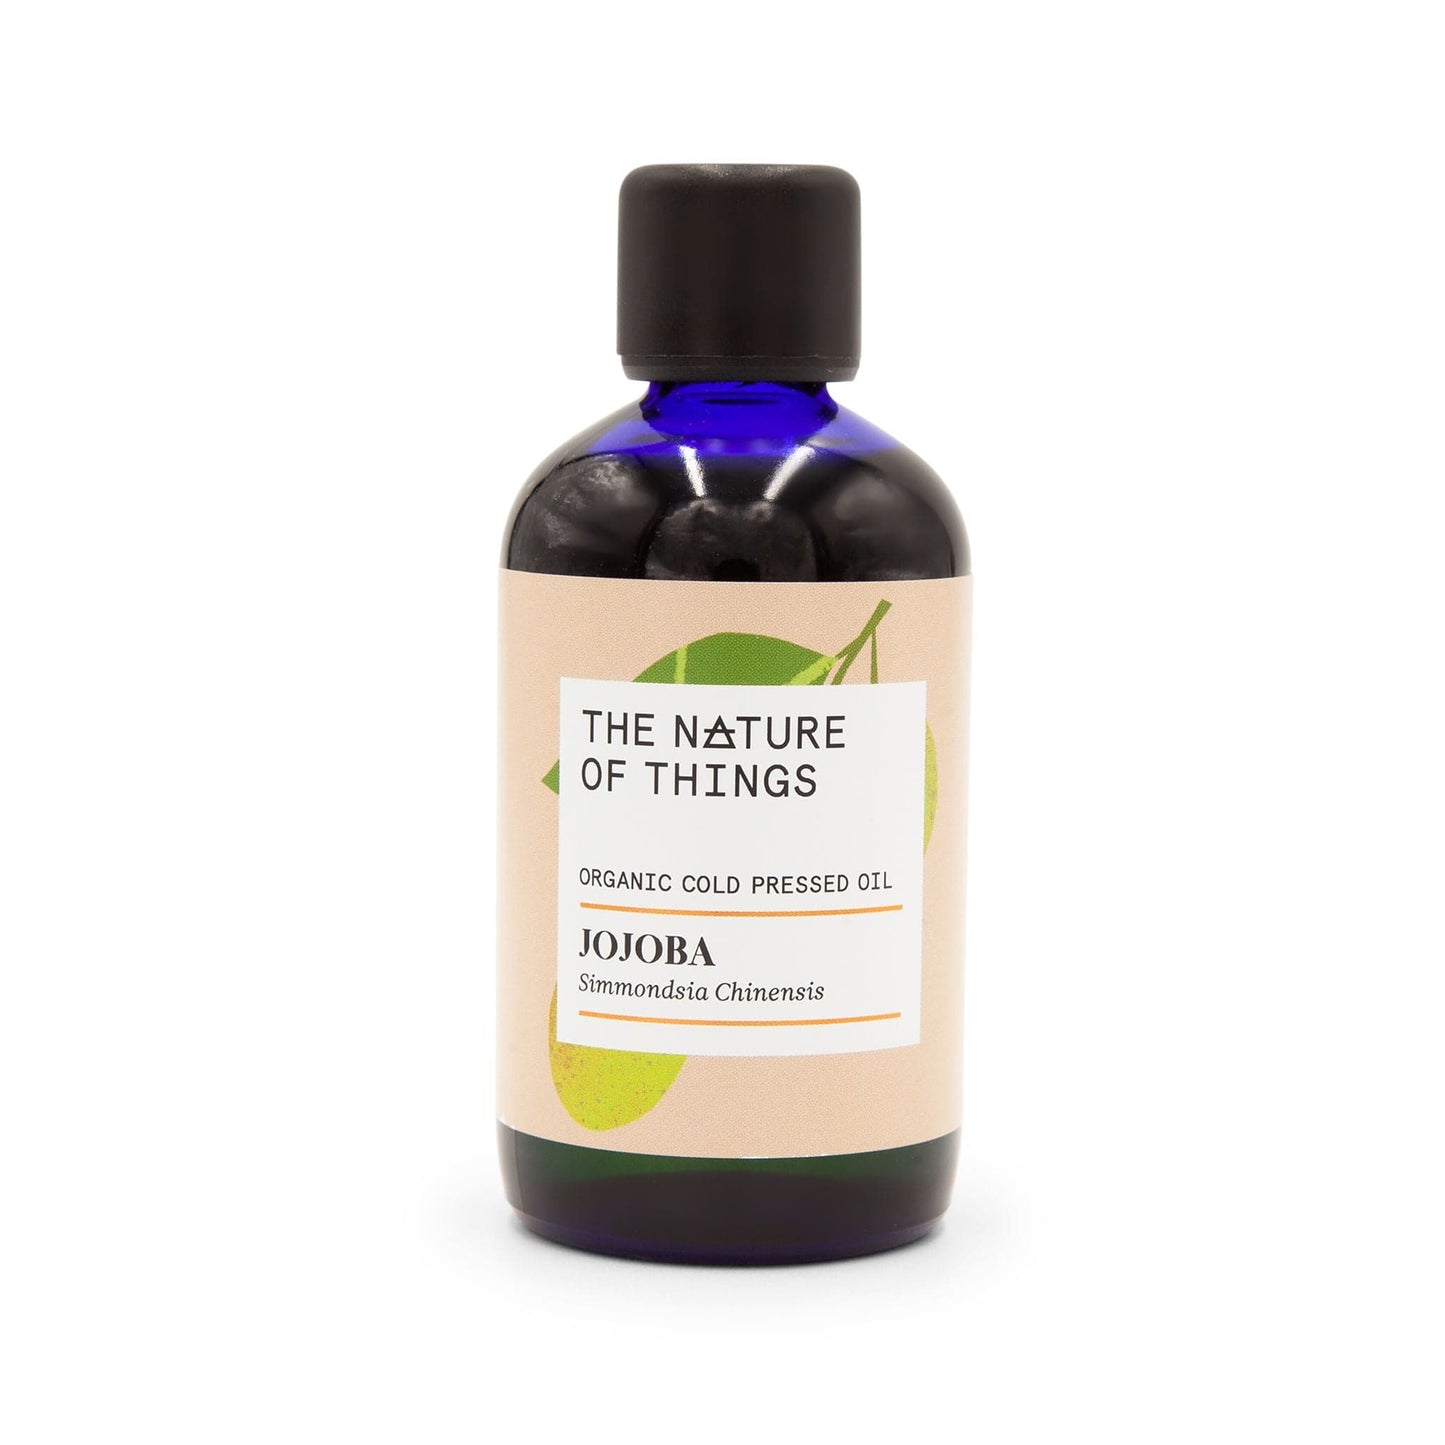 The Nature of Things Essential Oil Organic Jojoba Oil 100ml - The Nature of Things